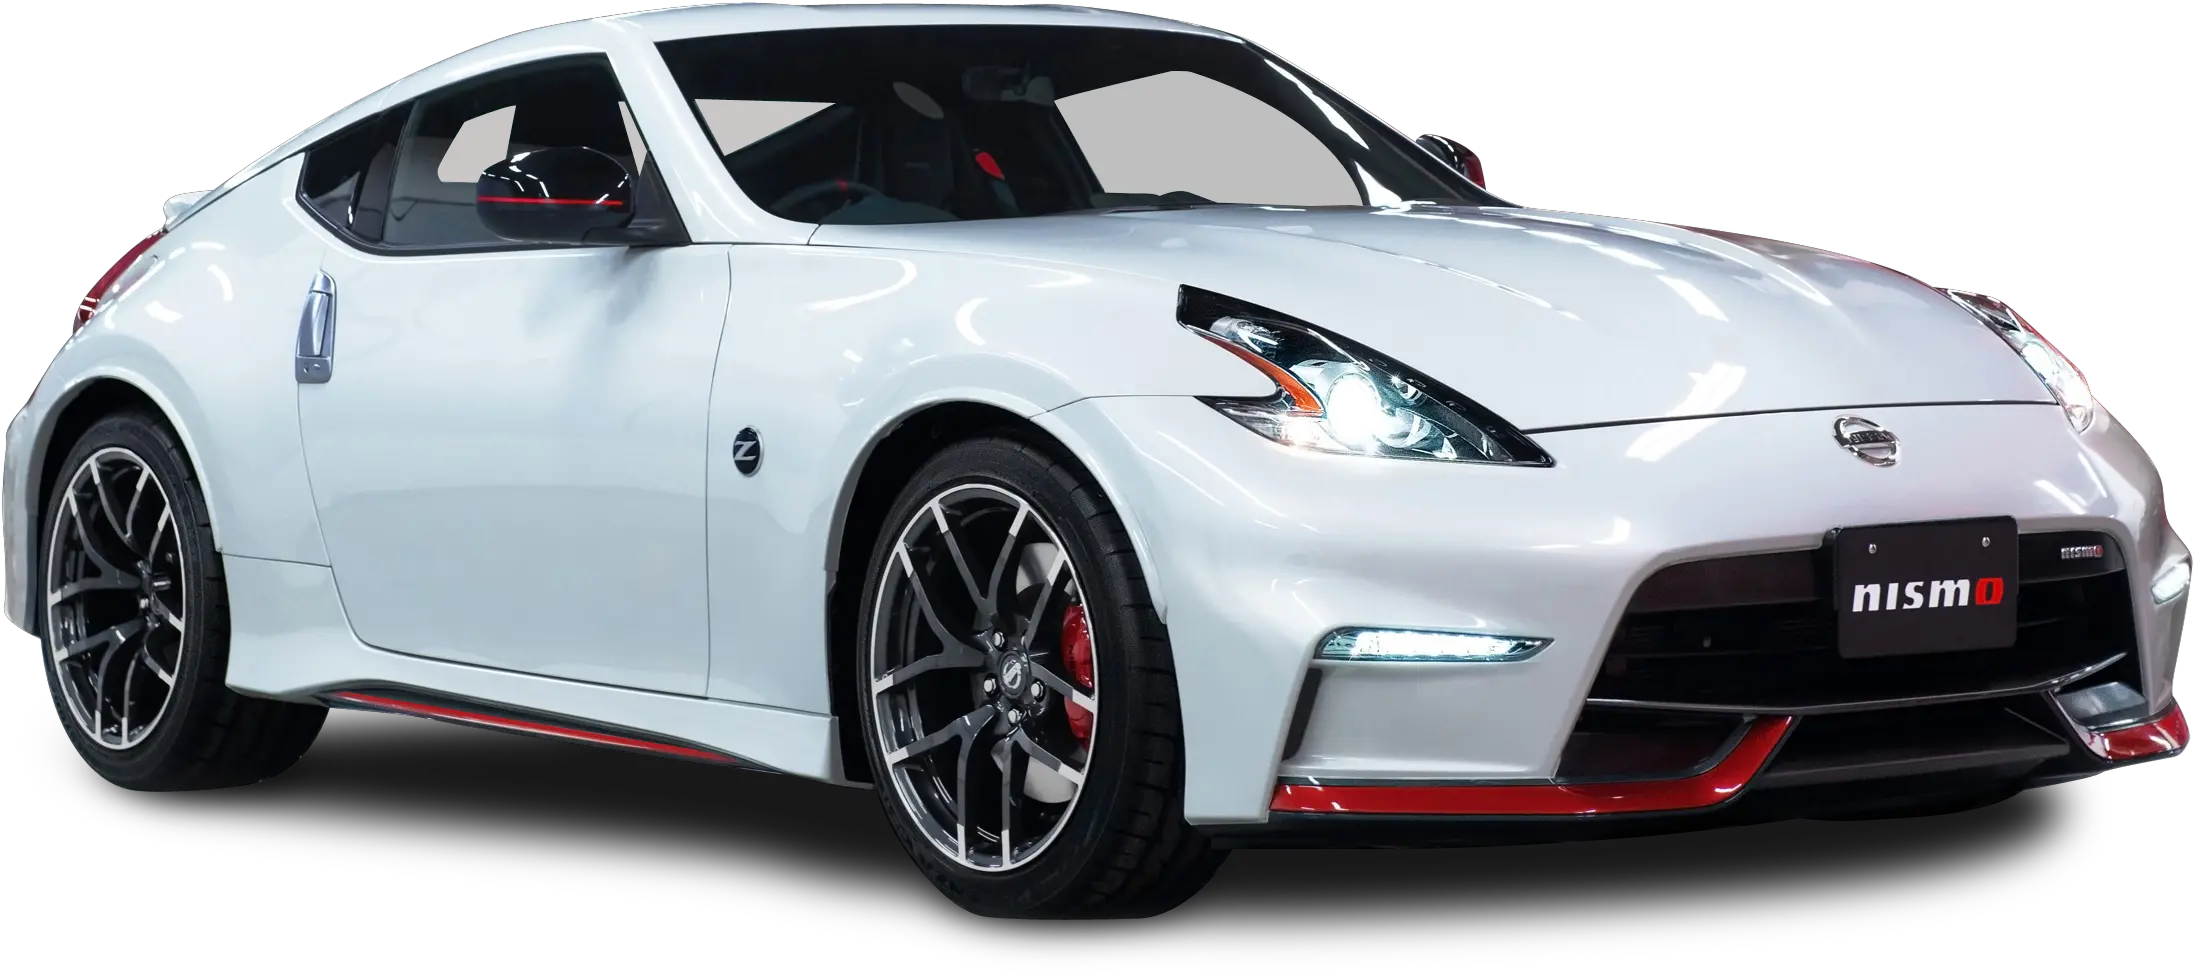 Download White Nissan 370z Nismo Car Png Image For Free Nissan 370z Png Mia Khalifa Png